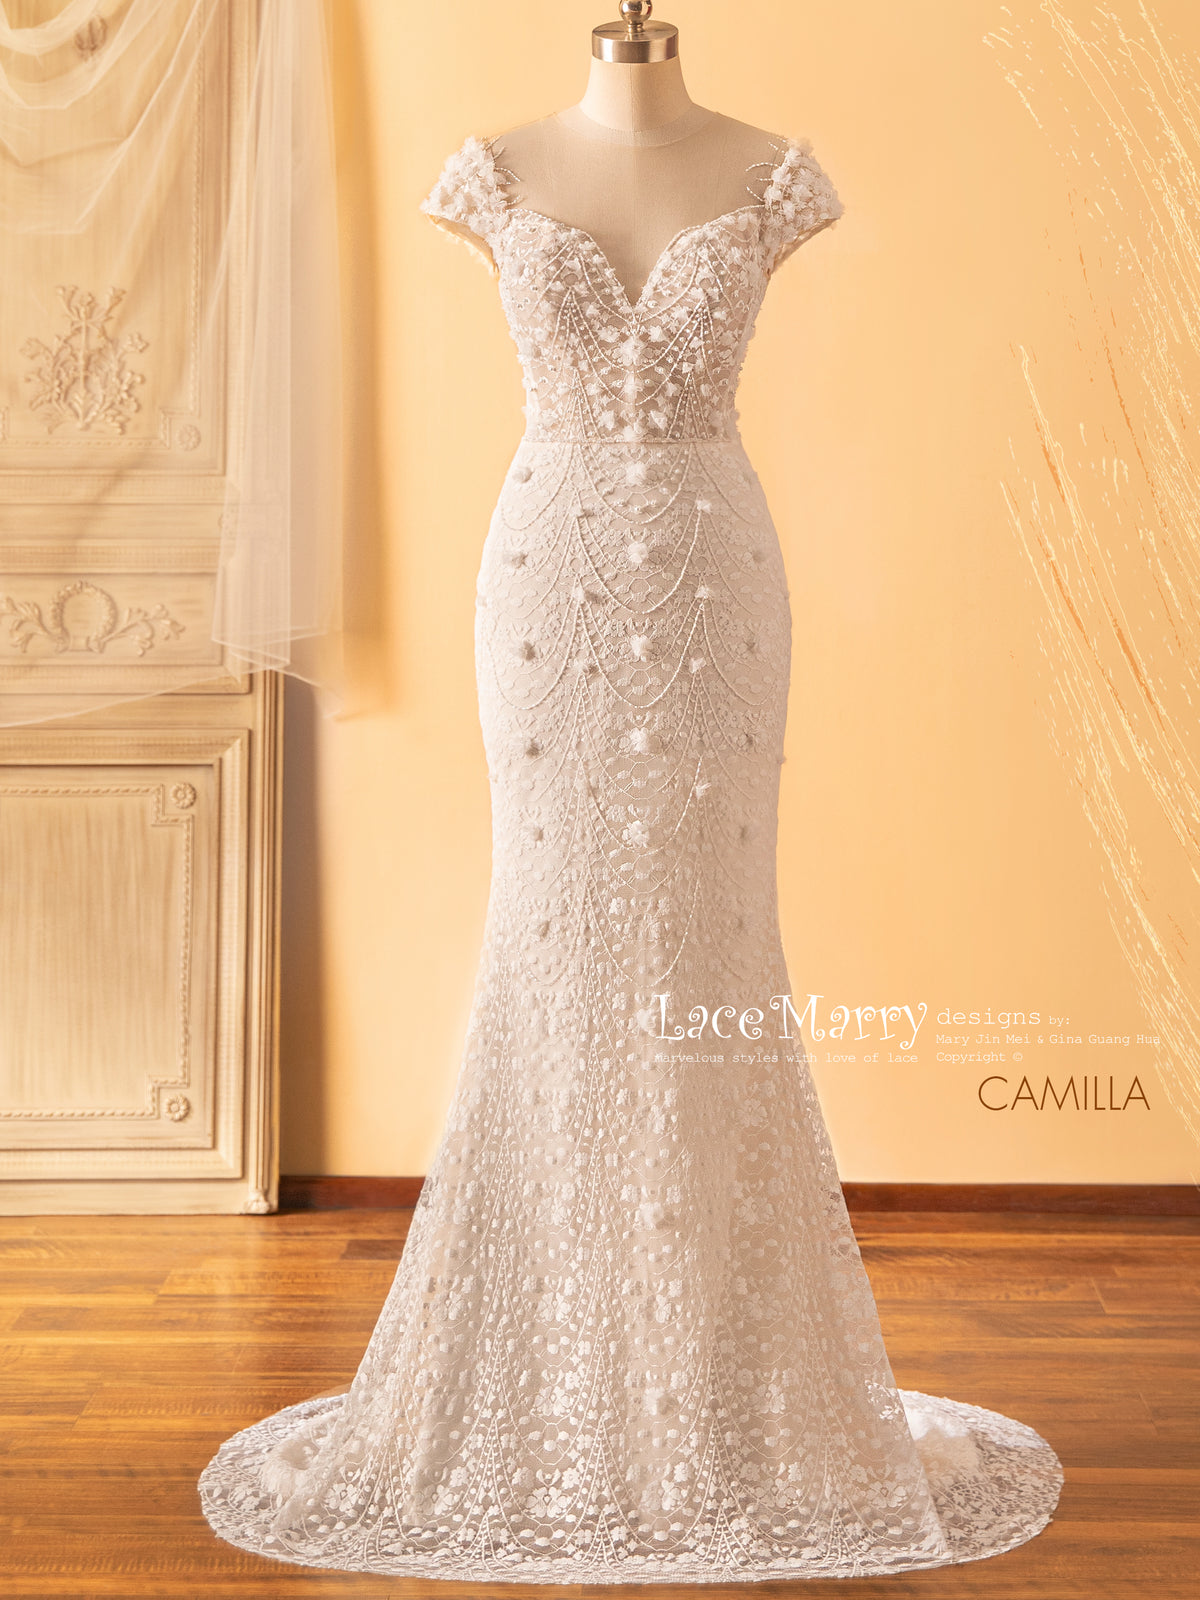 CAMILLA / Charming Lace Wedding Dress with Cap Sleeves